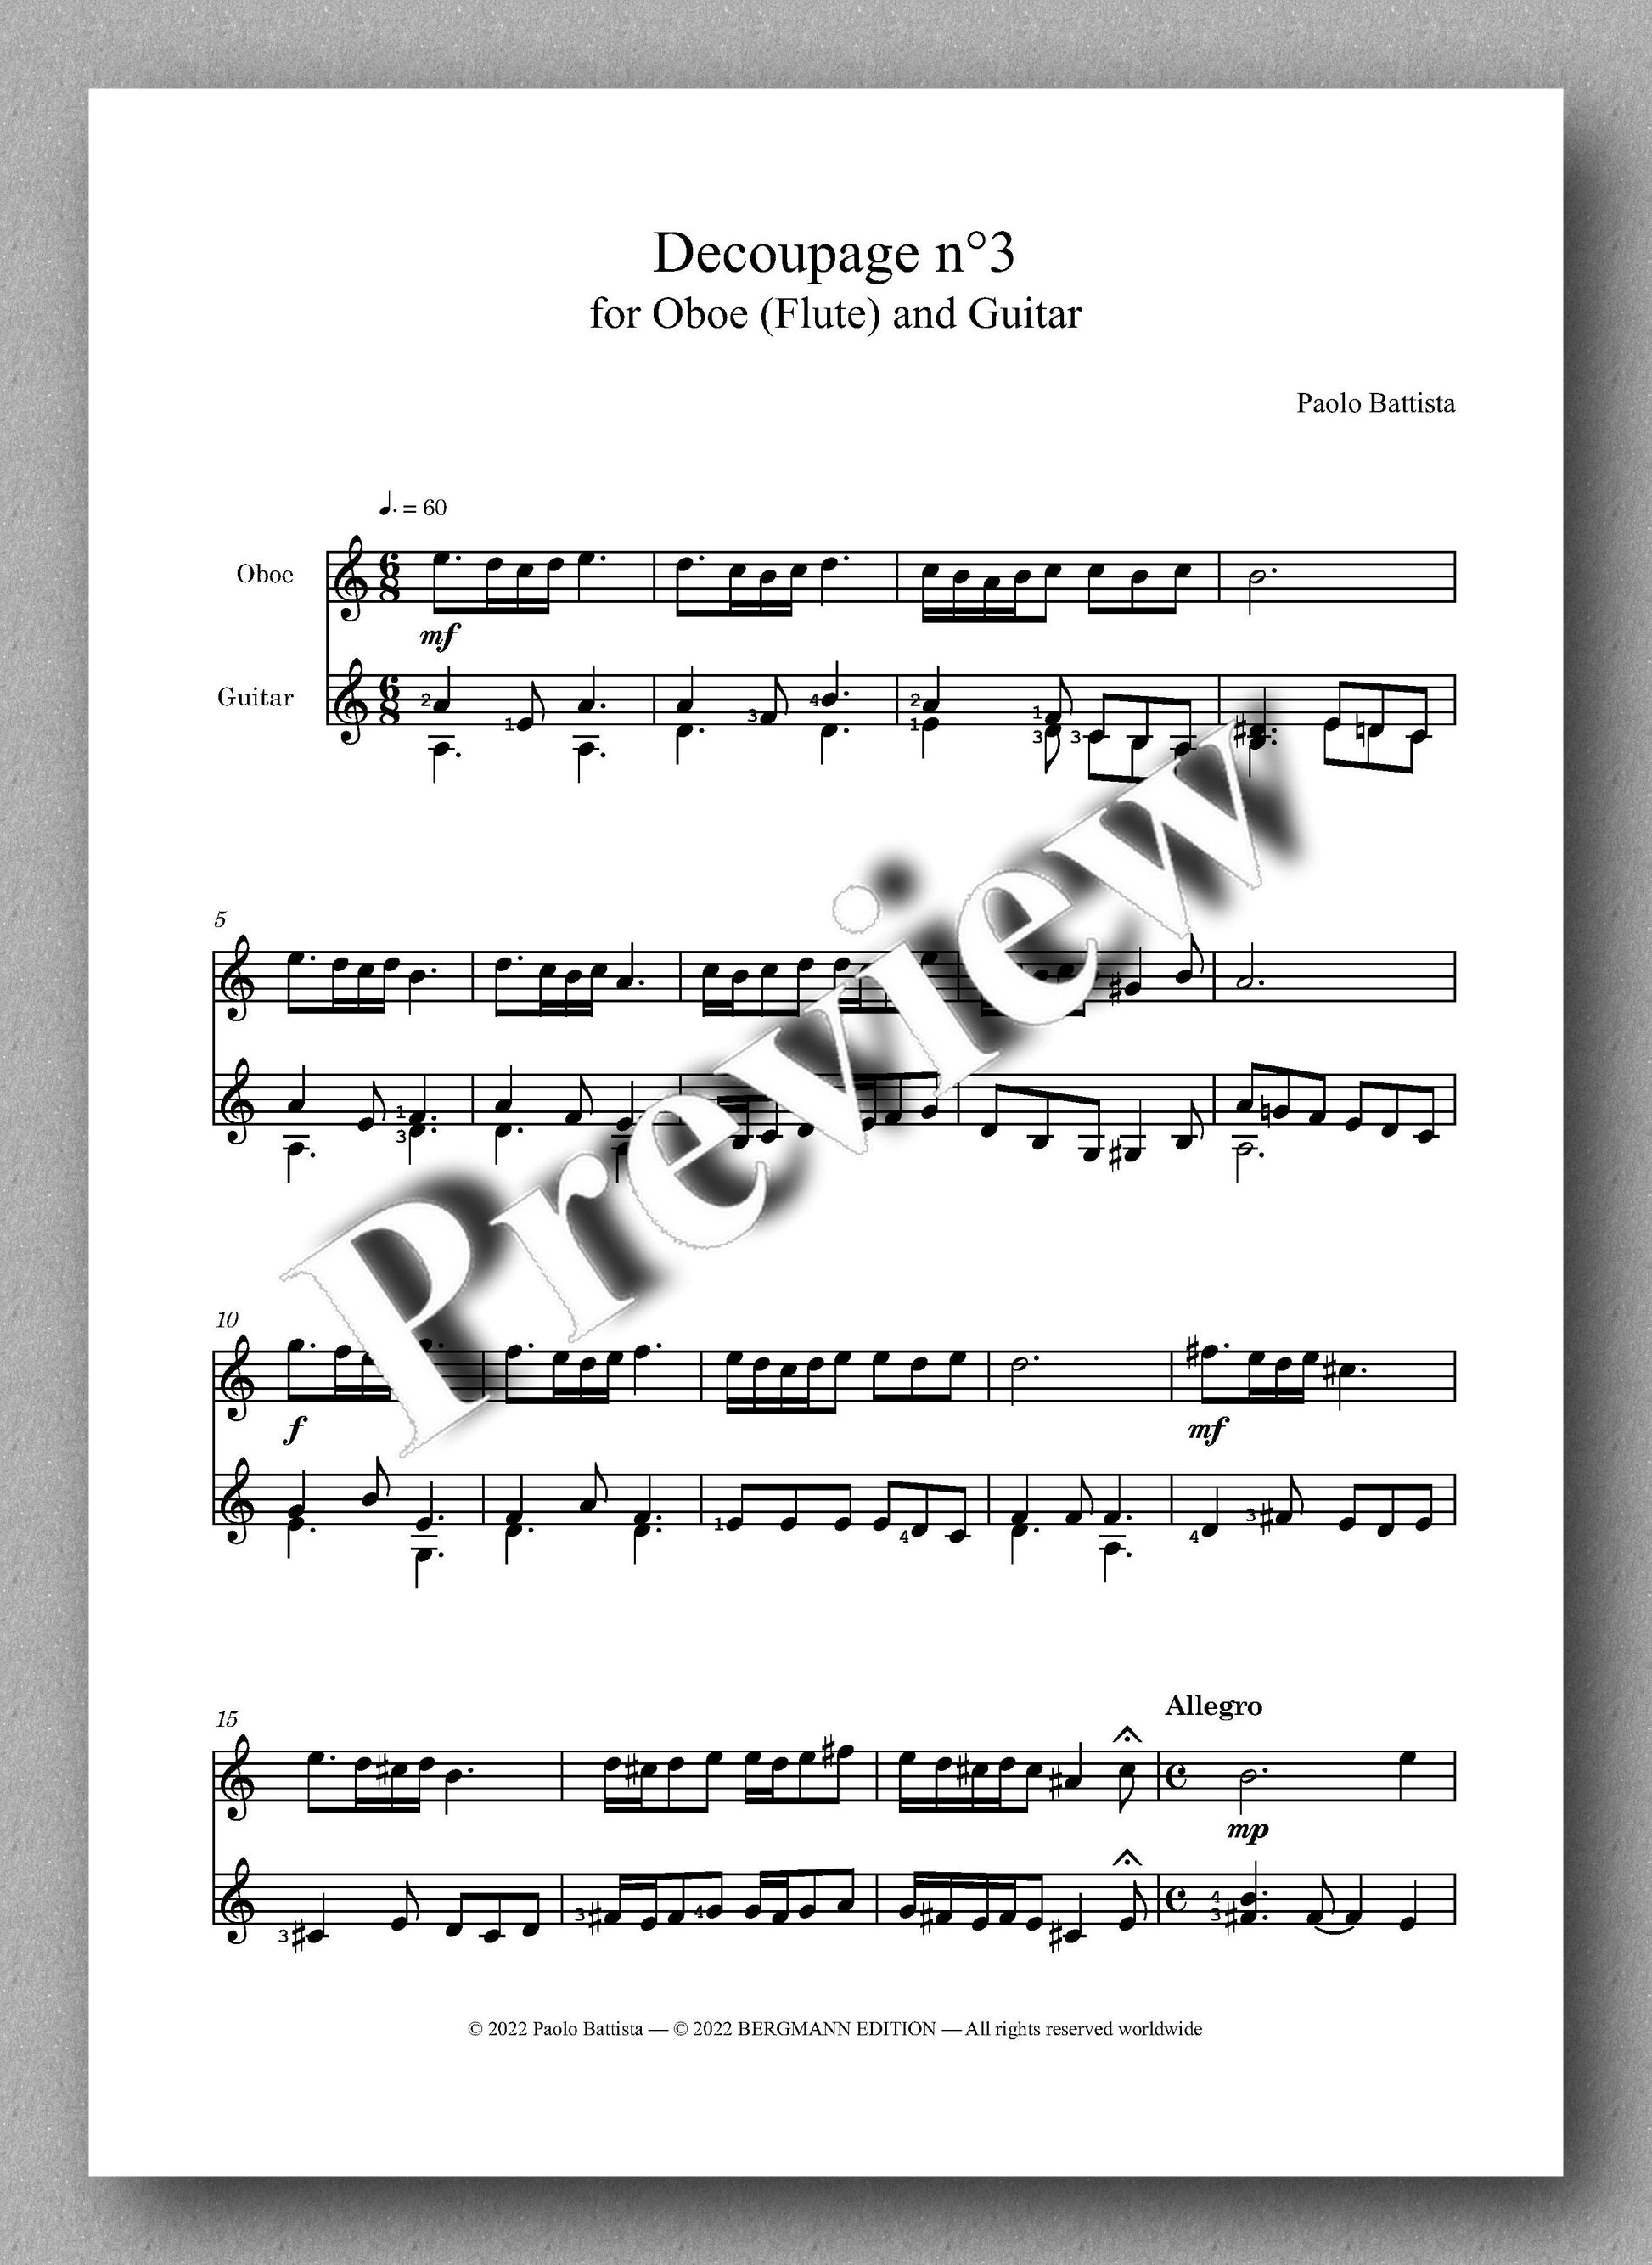 Decoupage n° 3 by Paolo Battista - preview of the music score